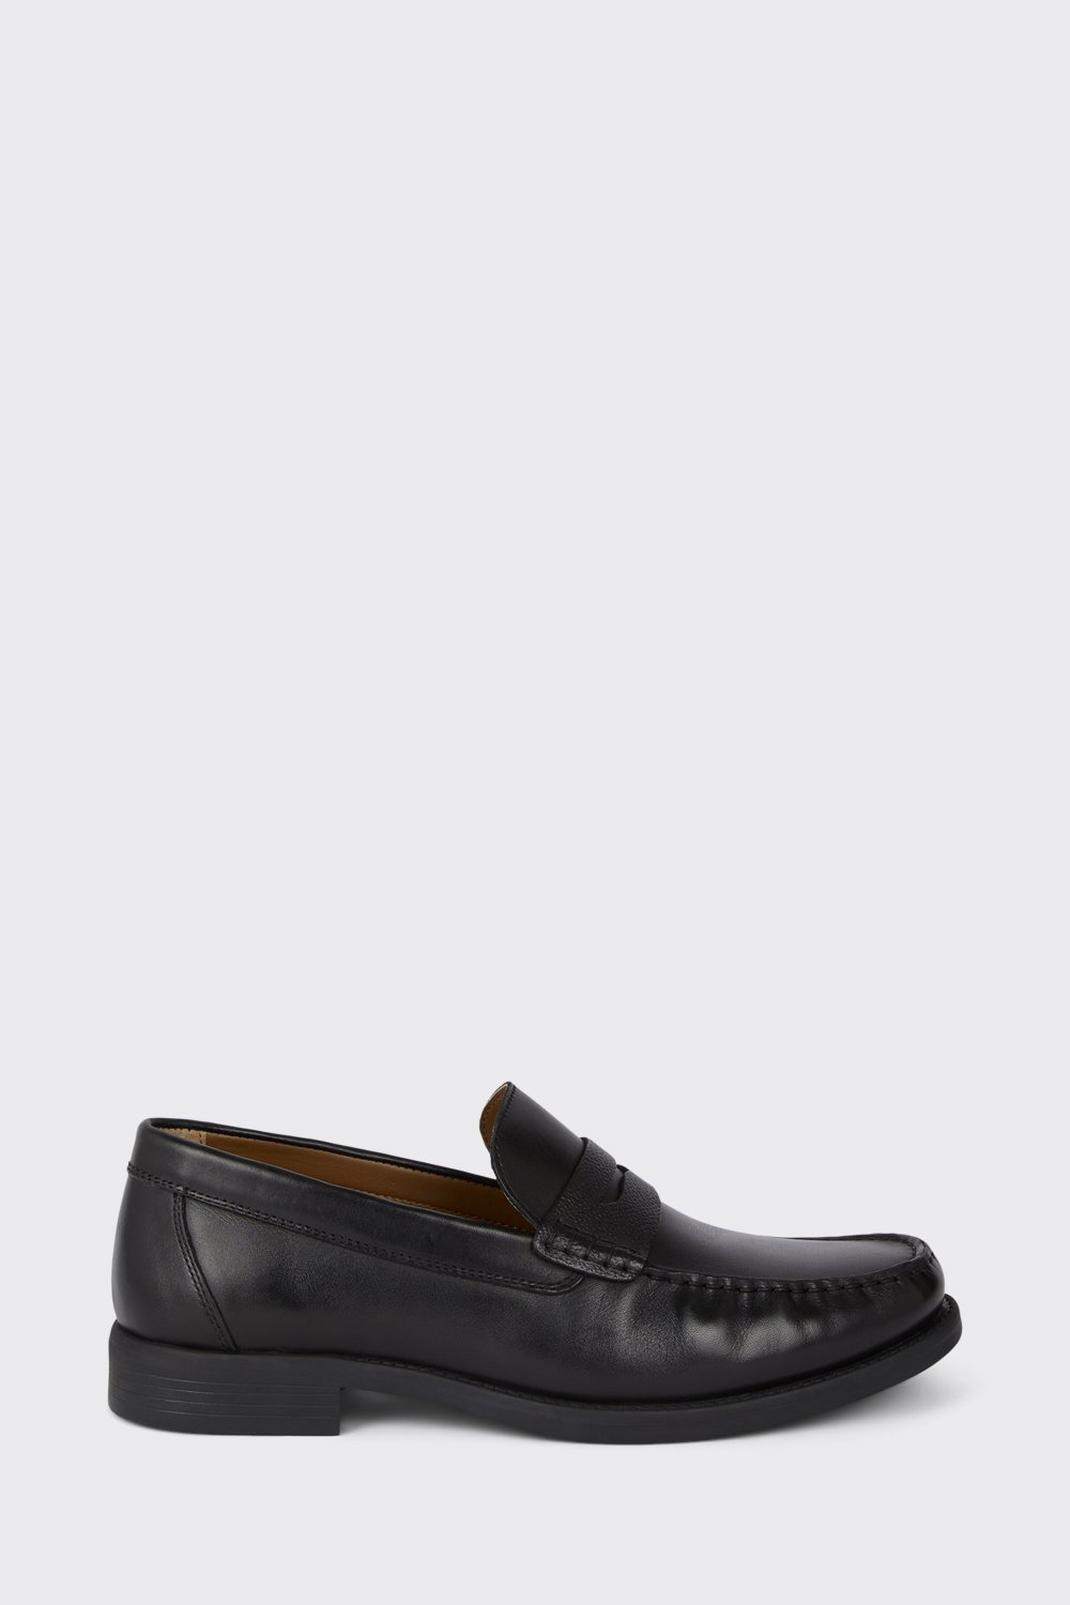 Leather Smart Textured Black Penny Loafers image number 1